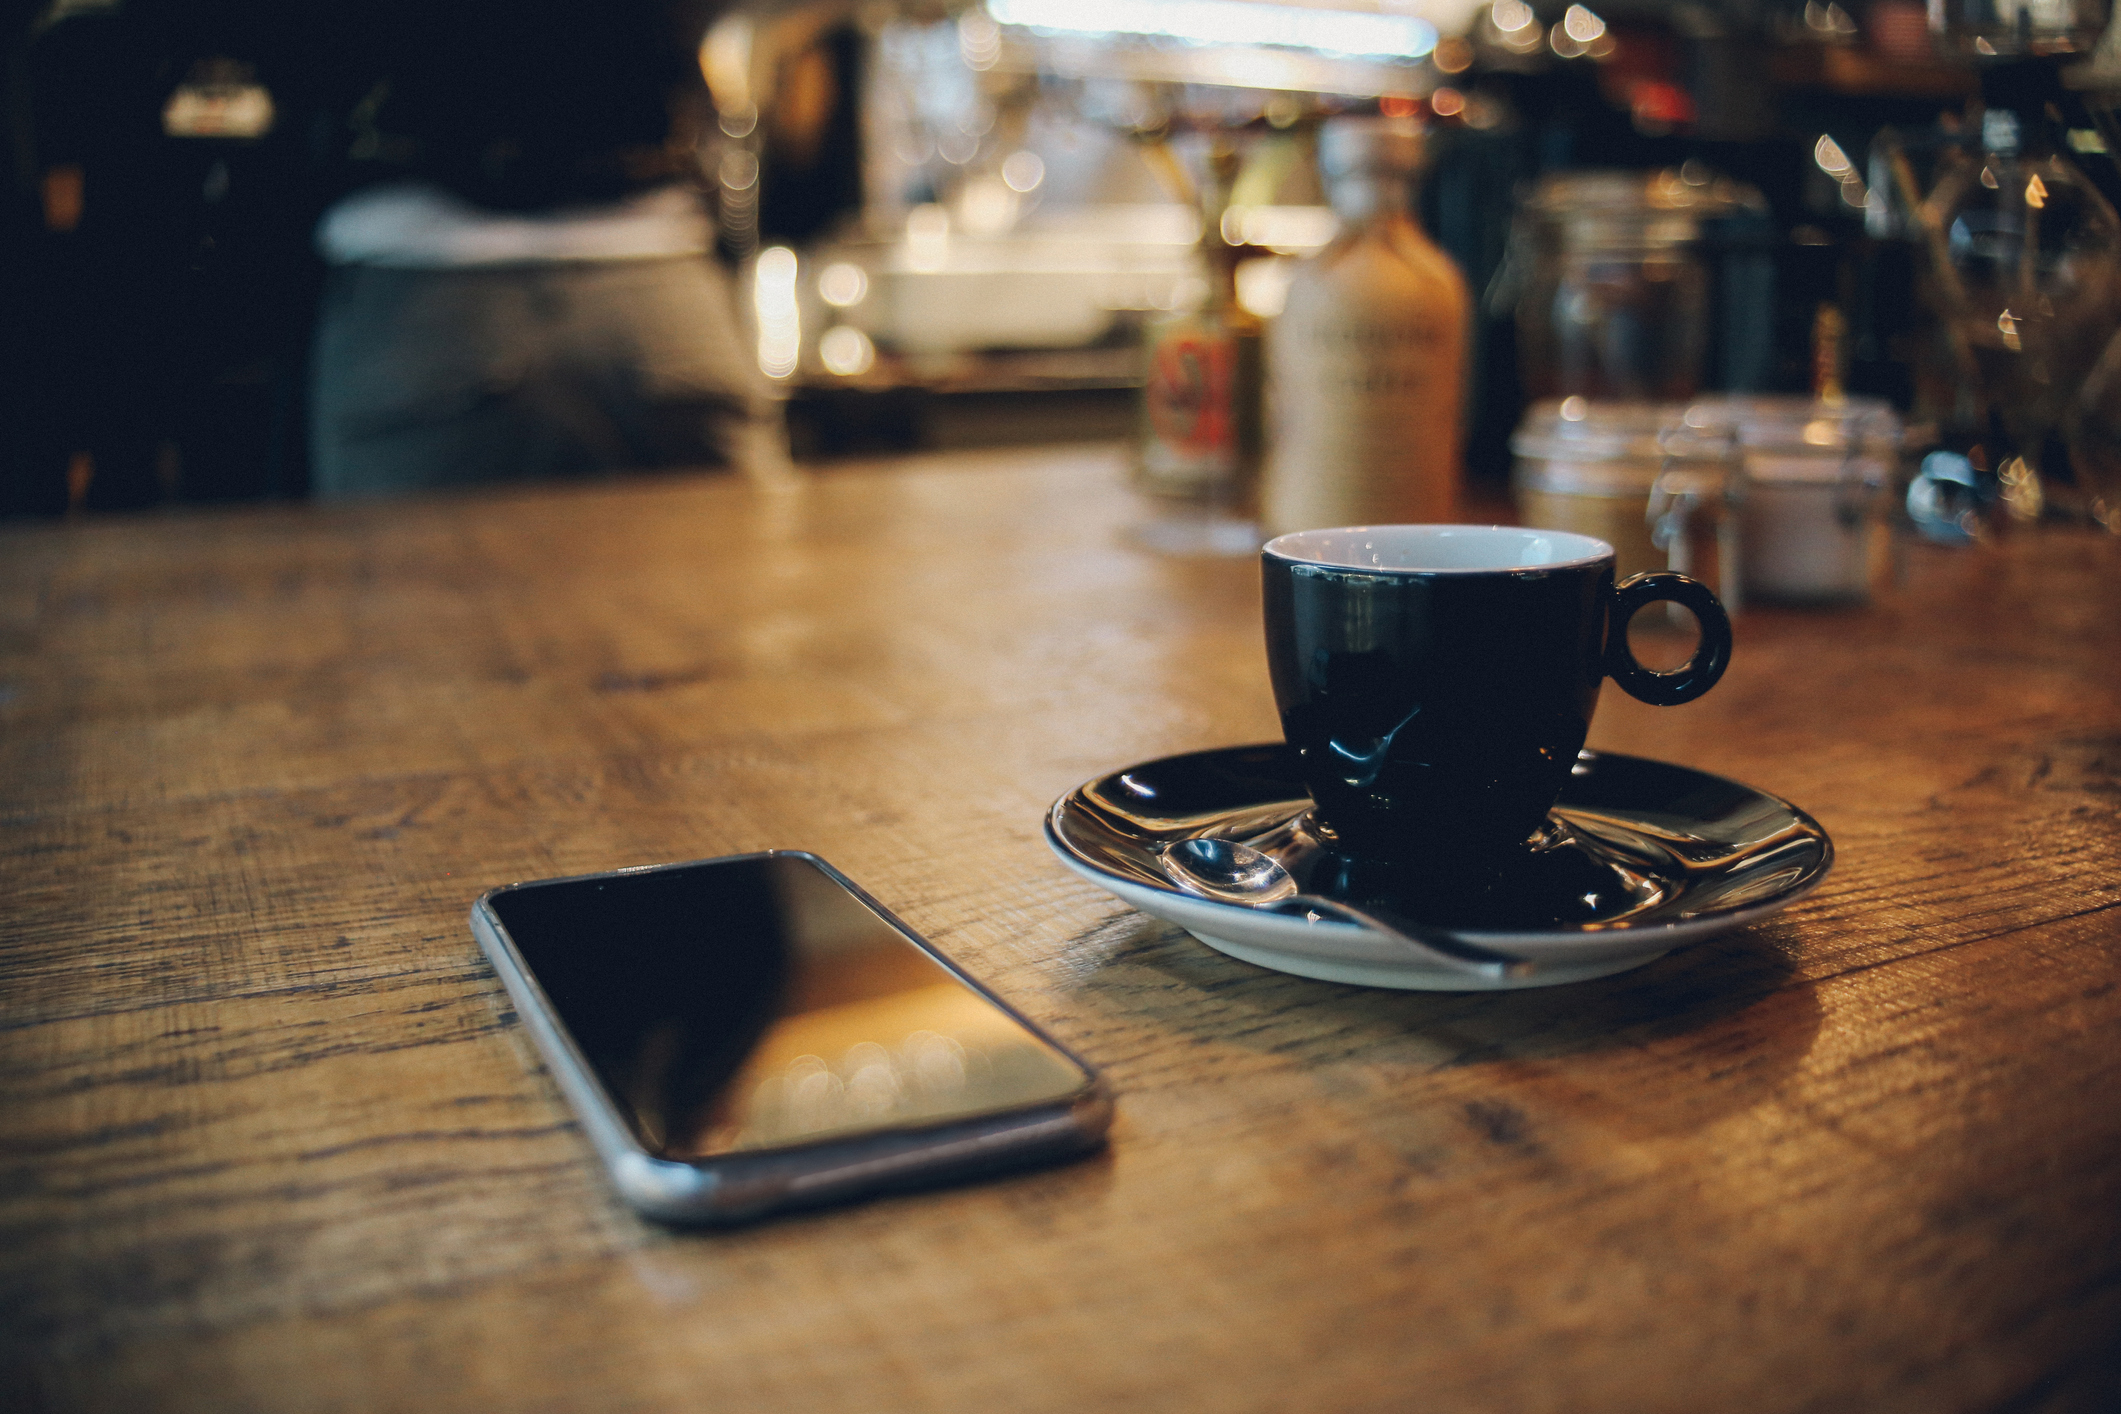 A phone and an espresso cup lay on the table.